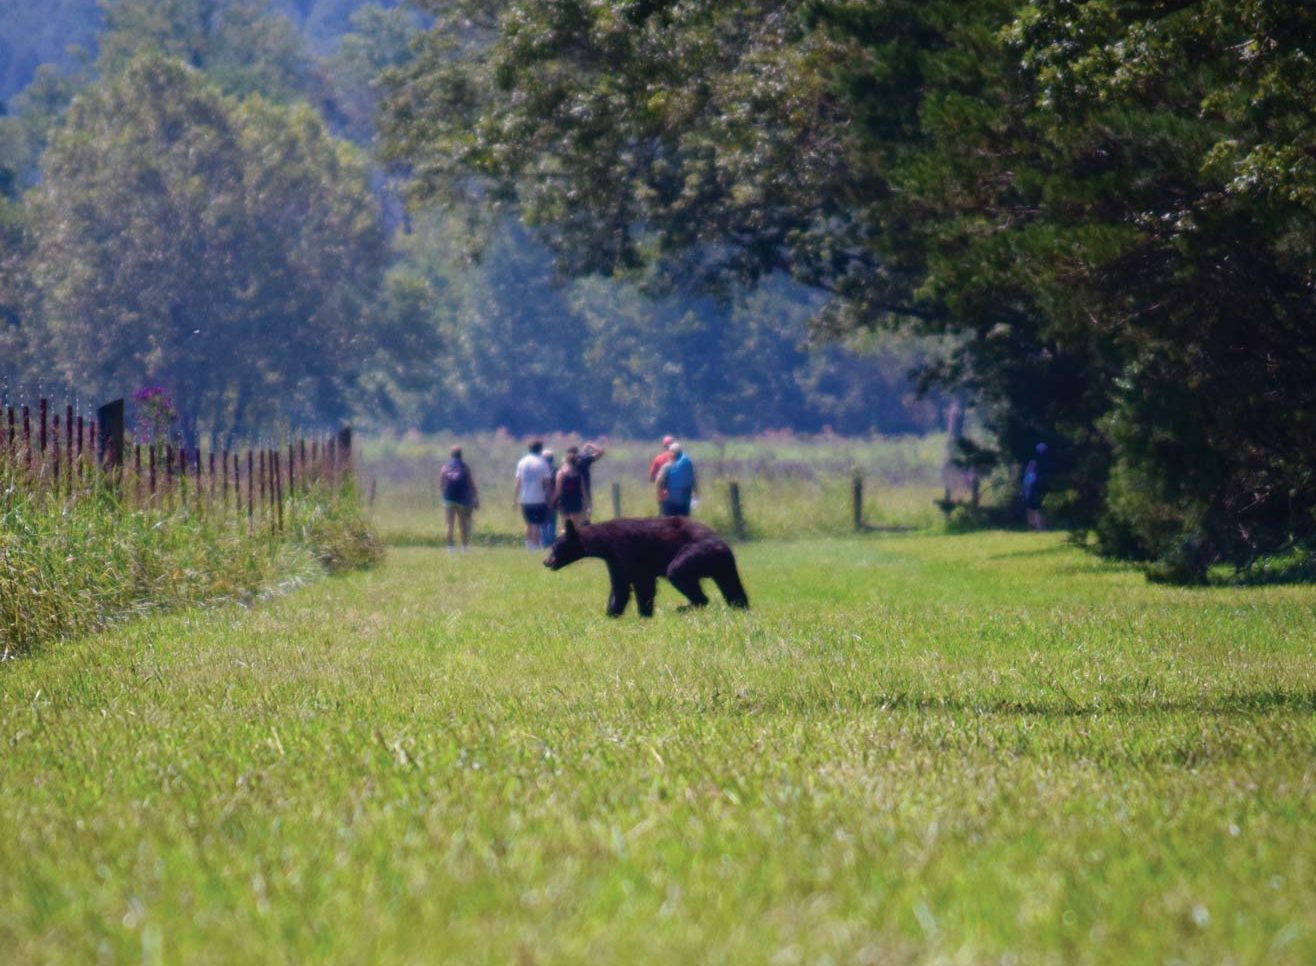 A bear in a open field in the foreground with park visitors behind her